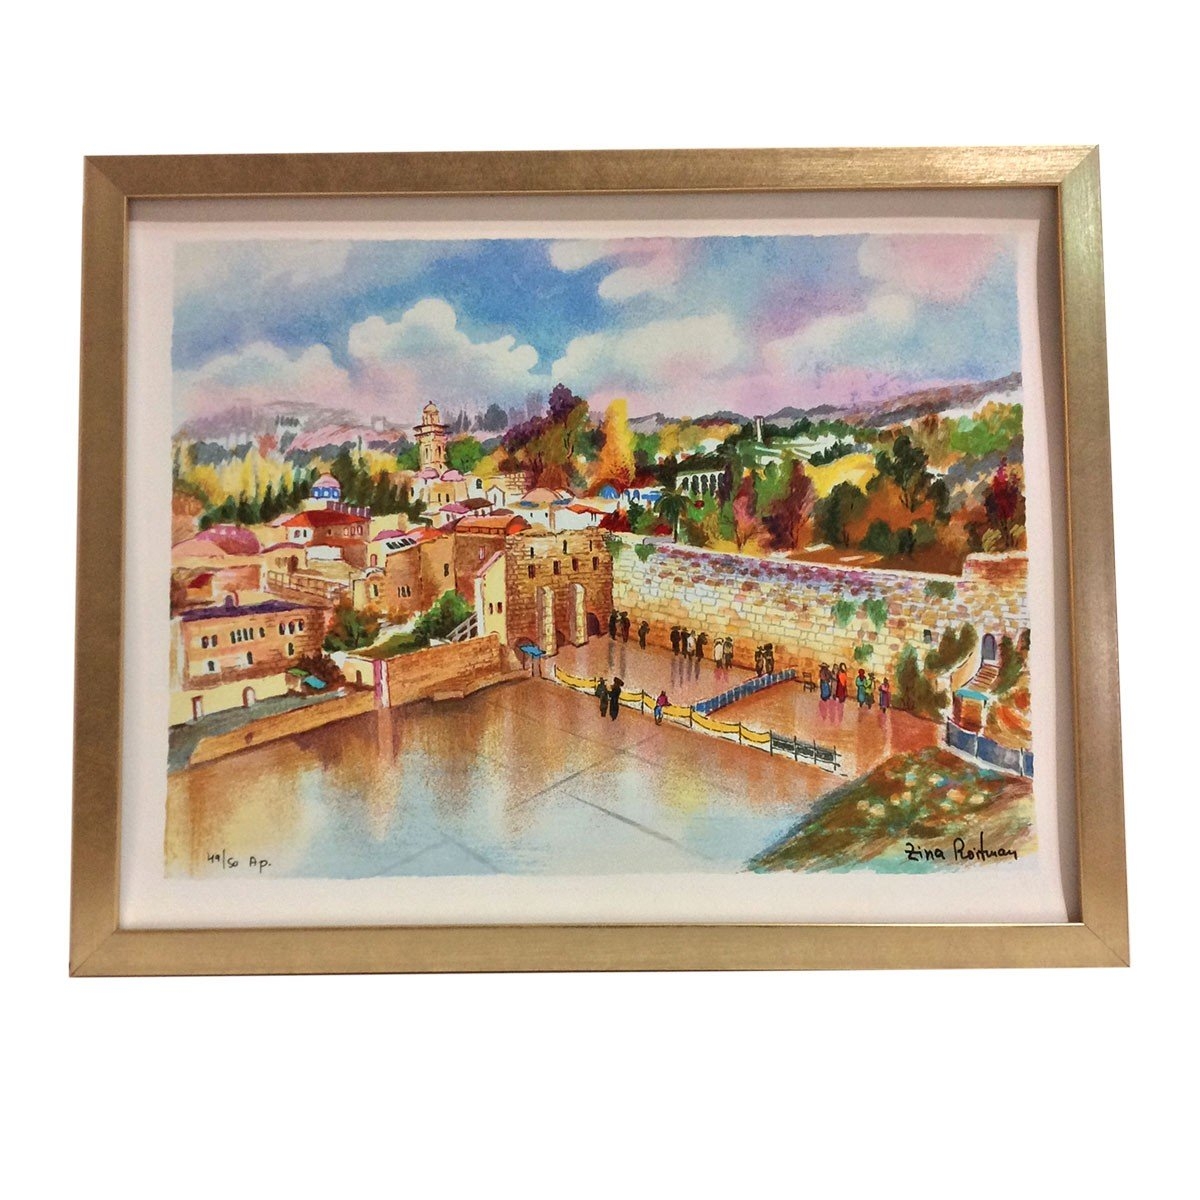 Limited Edition Serigraph of Western Wall by Zina Roitman - 1